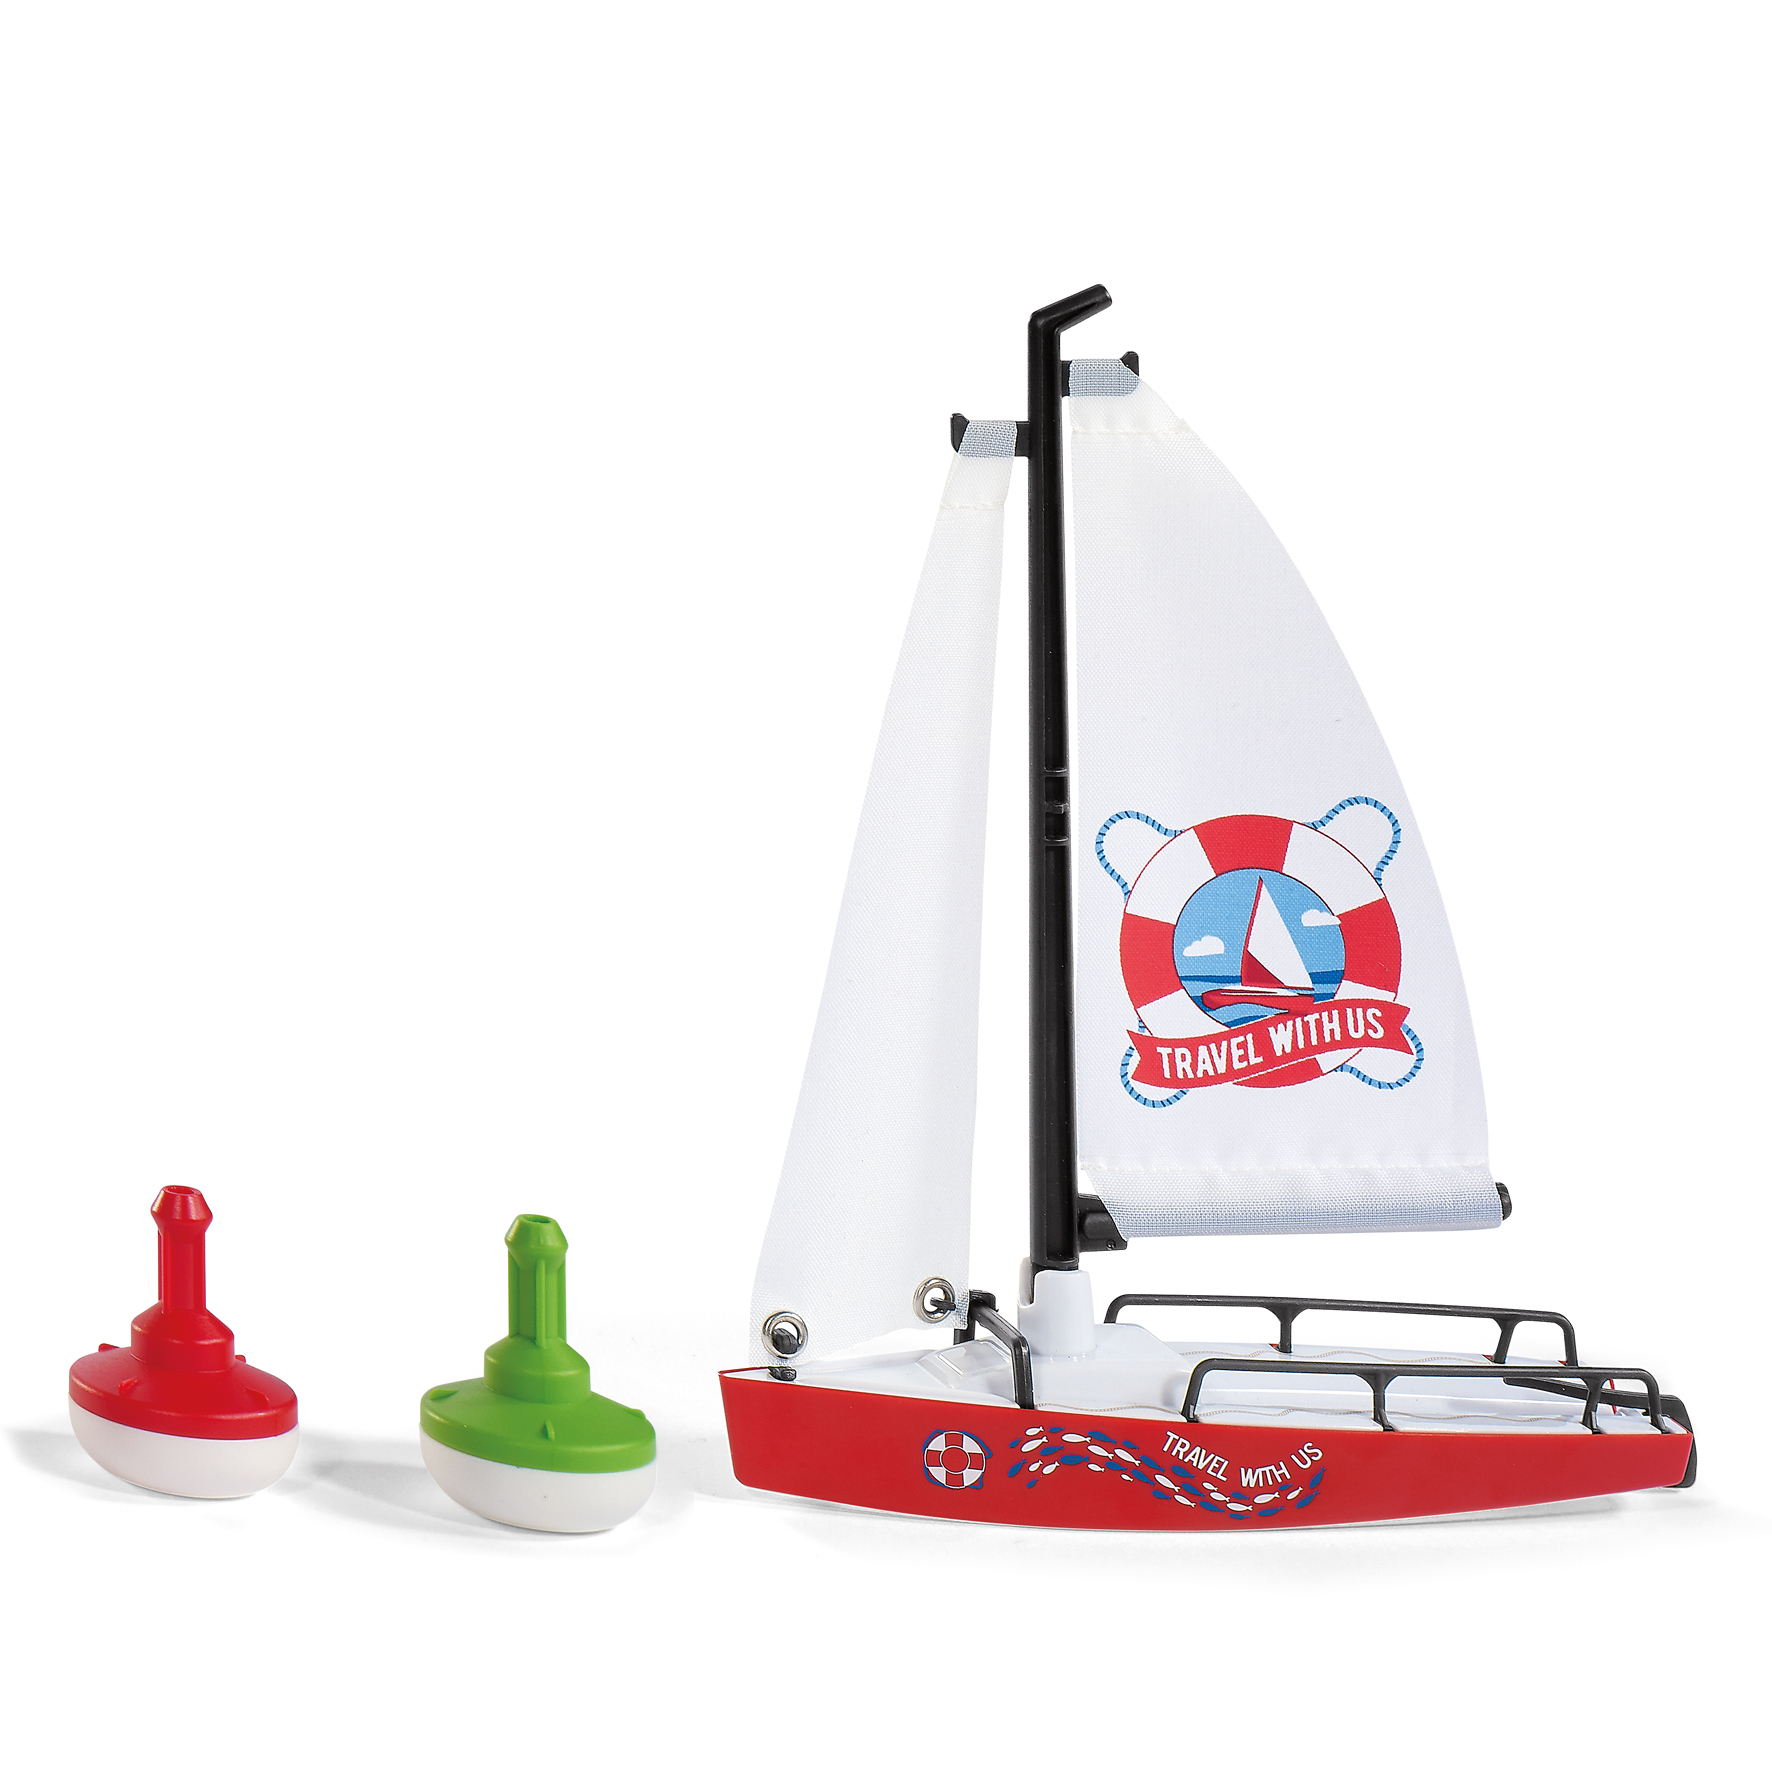 Outlet sailing boat with buoys